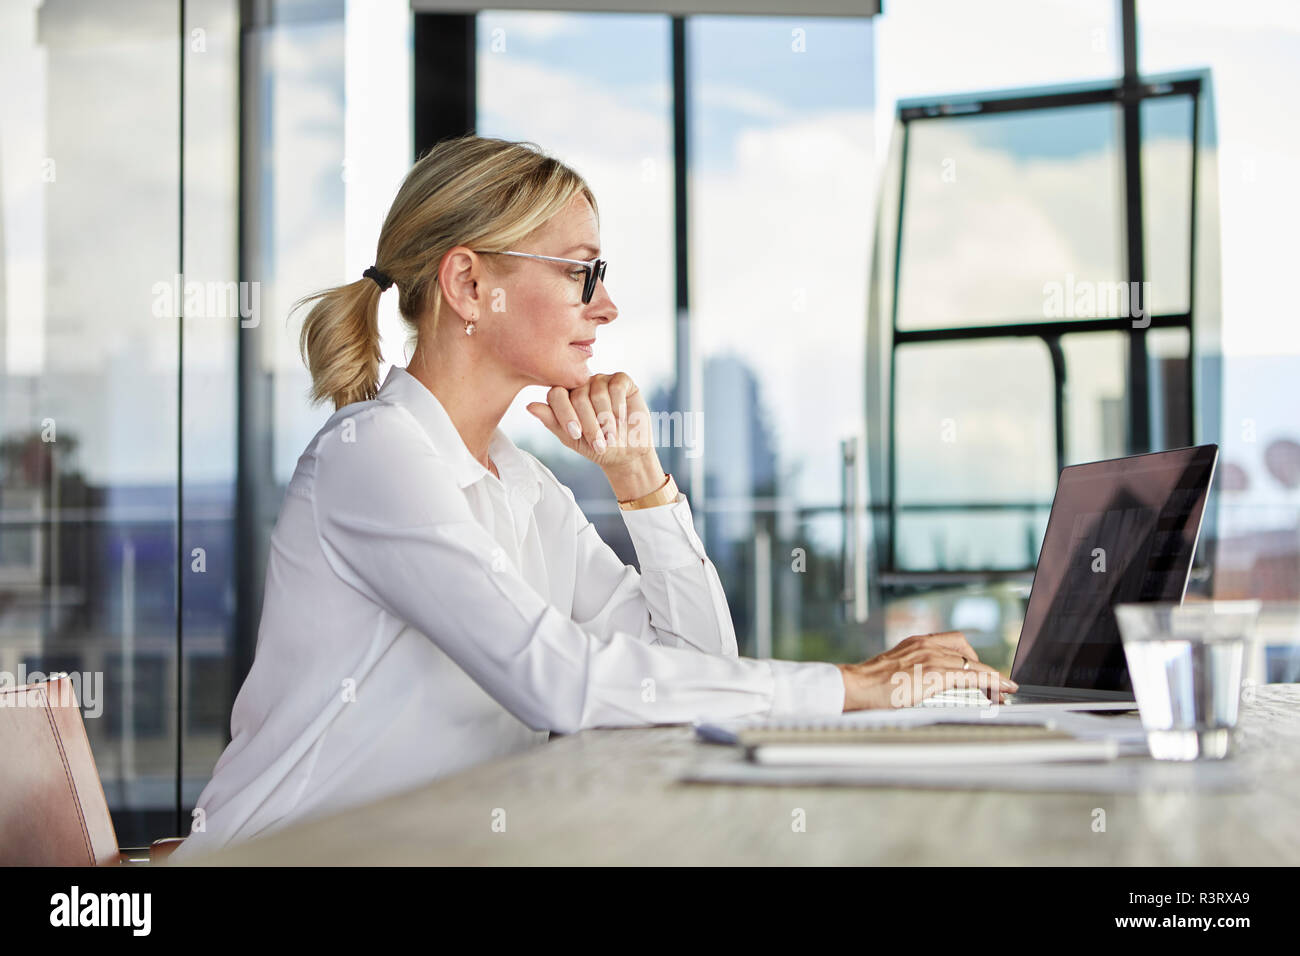 Businesswoman working in office, using laptop Stock Photo